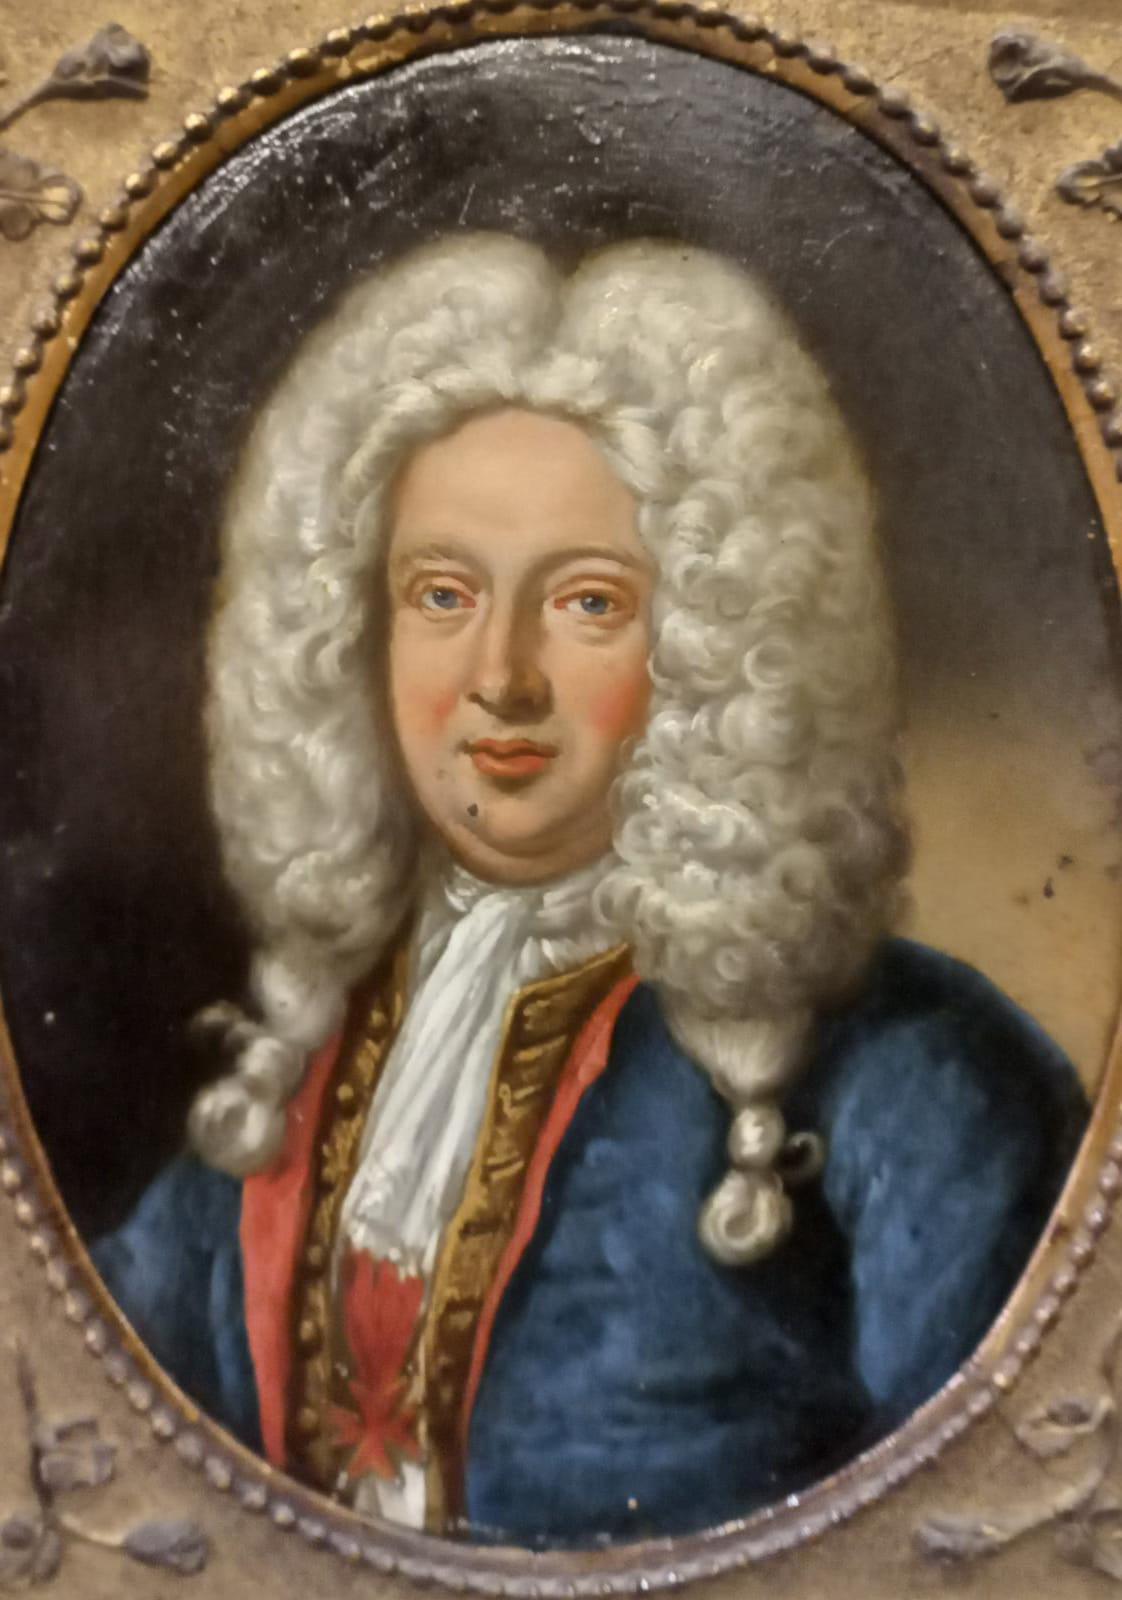 Oiled Portrait of a French nobleman